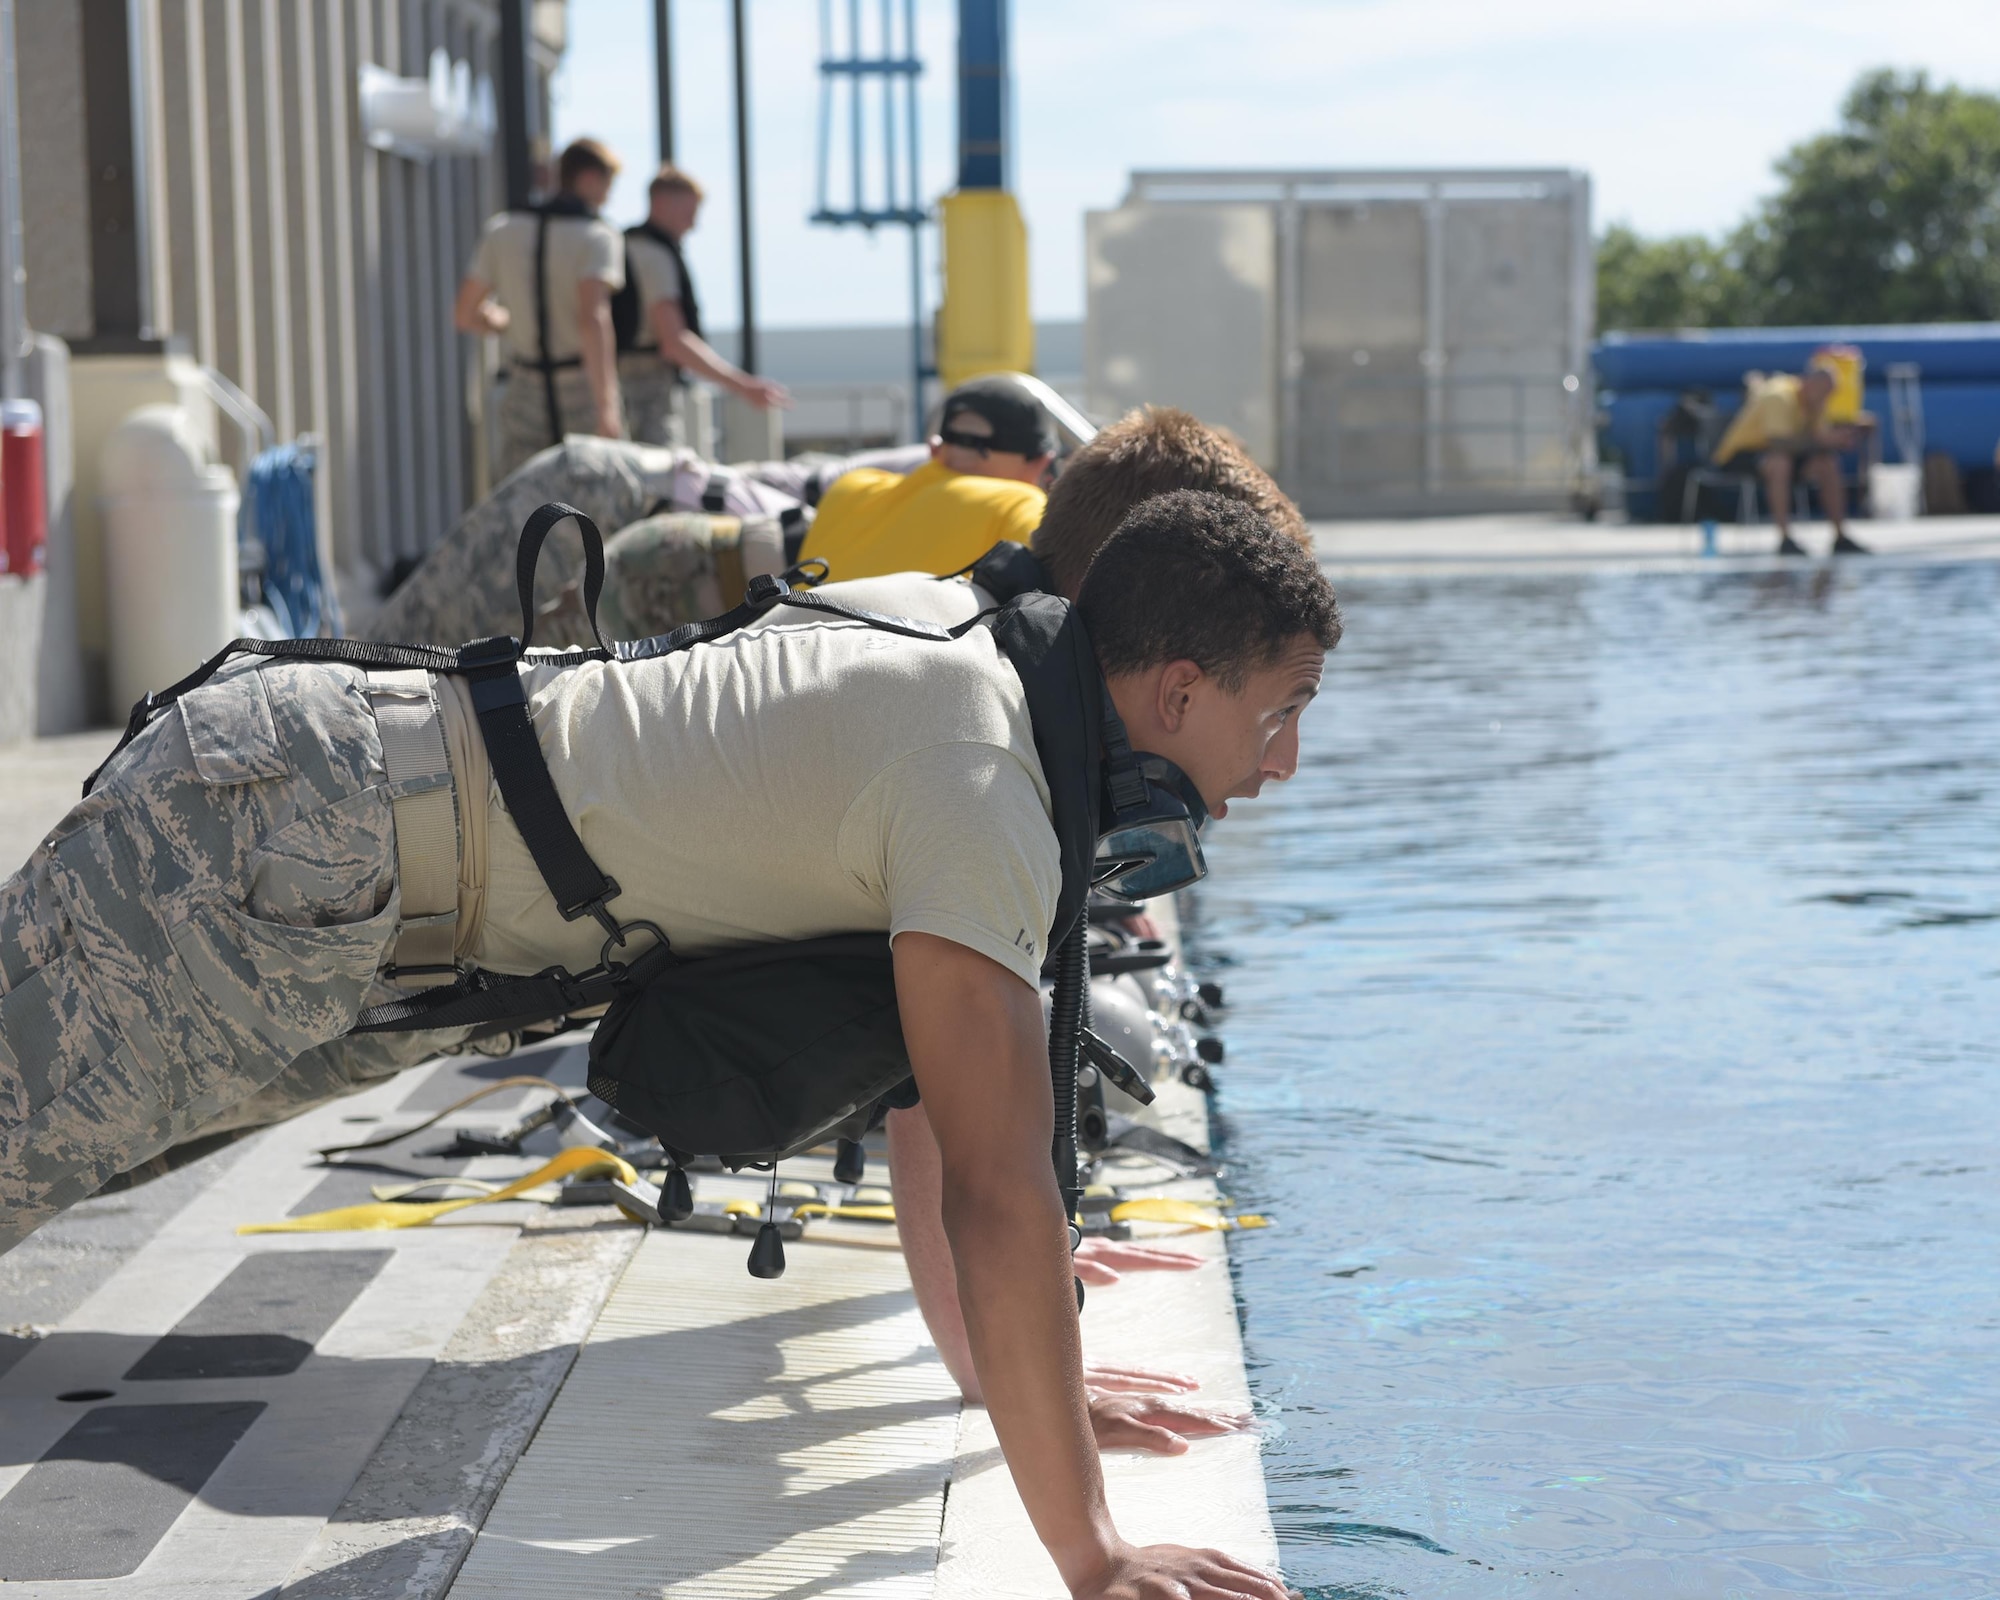 U.S. Air Force diving students prepare for the morning’s dive training by doing a set of pushups at Naval Support Activity Panama City, Fla., Aug. 2, 2017. Both pararescue and combat controller Airmen get their dive training at the Naval Diving and Salvage Training Center.